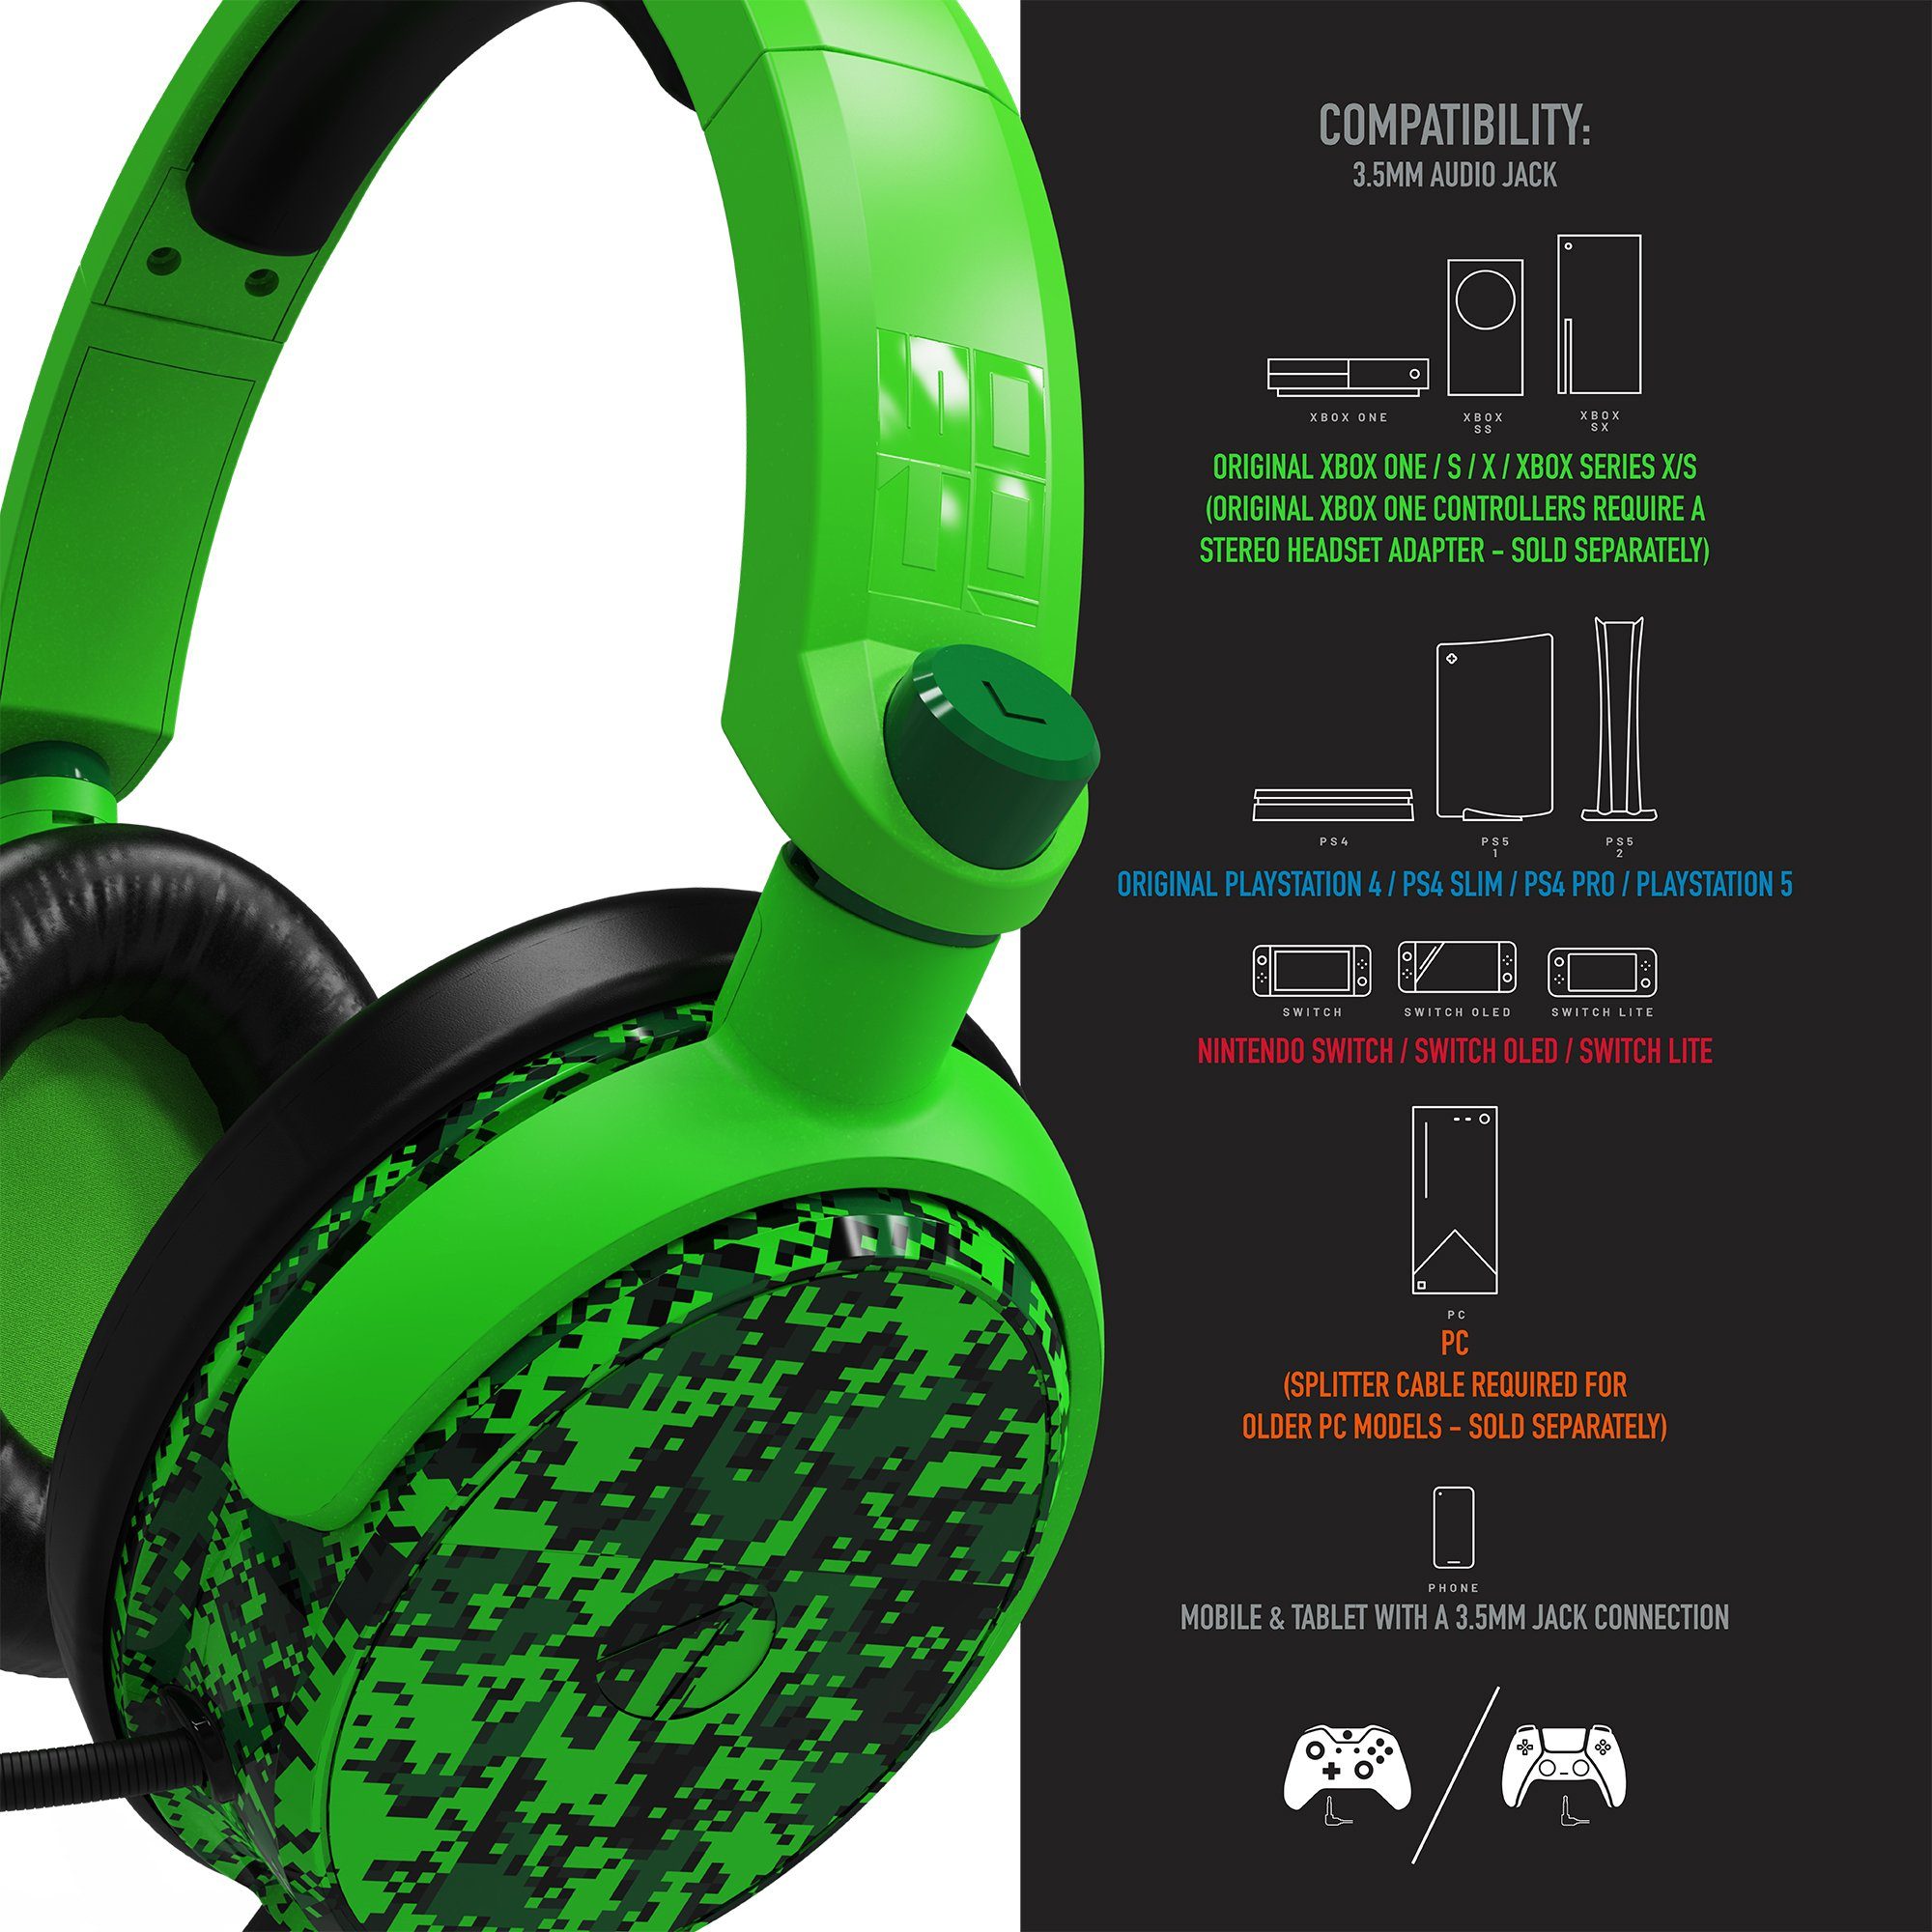 Gaming Multiformat Camo camouflage Gaming-Headset Headset C6-100 Stealth grün